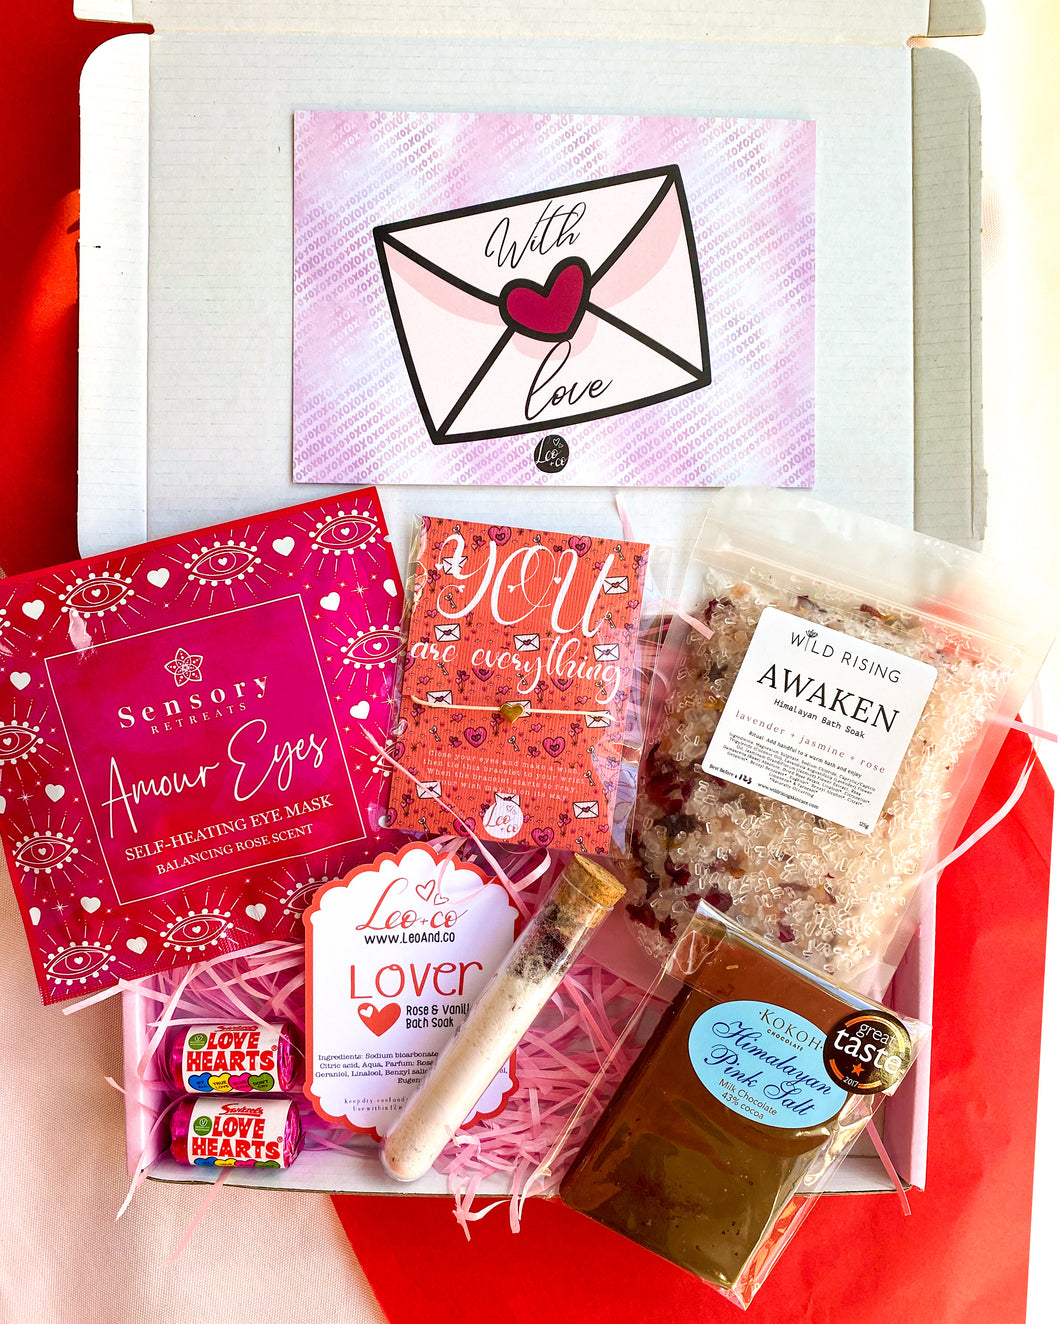 The Lover Gift Box